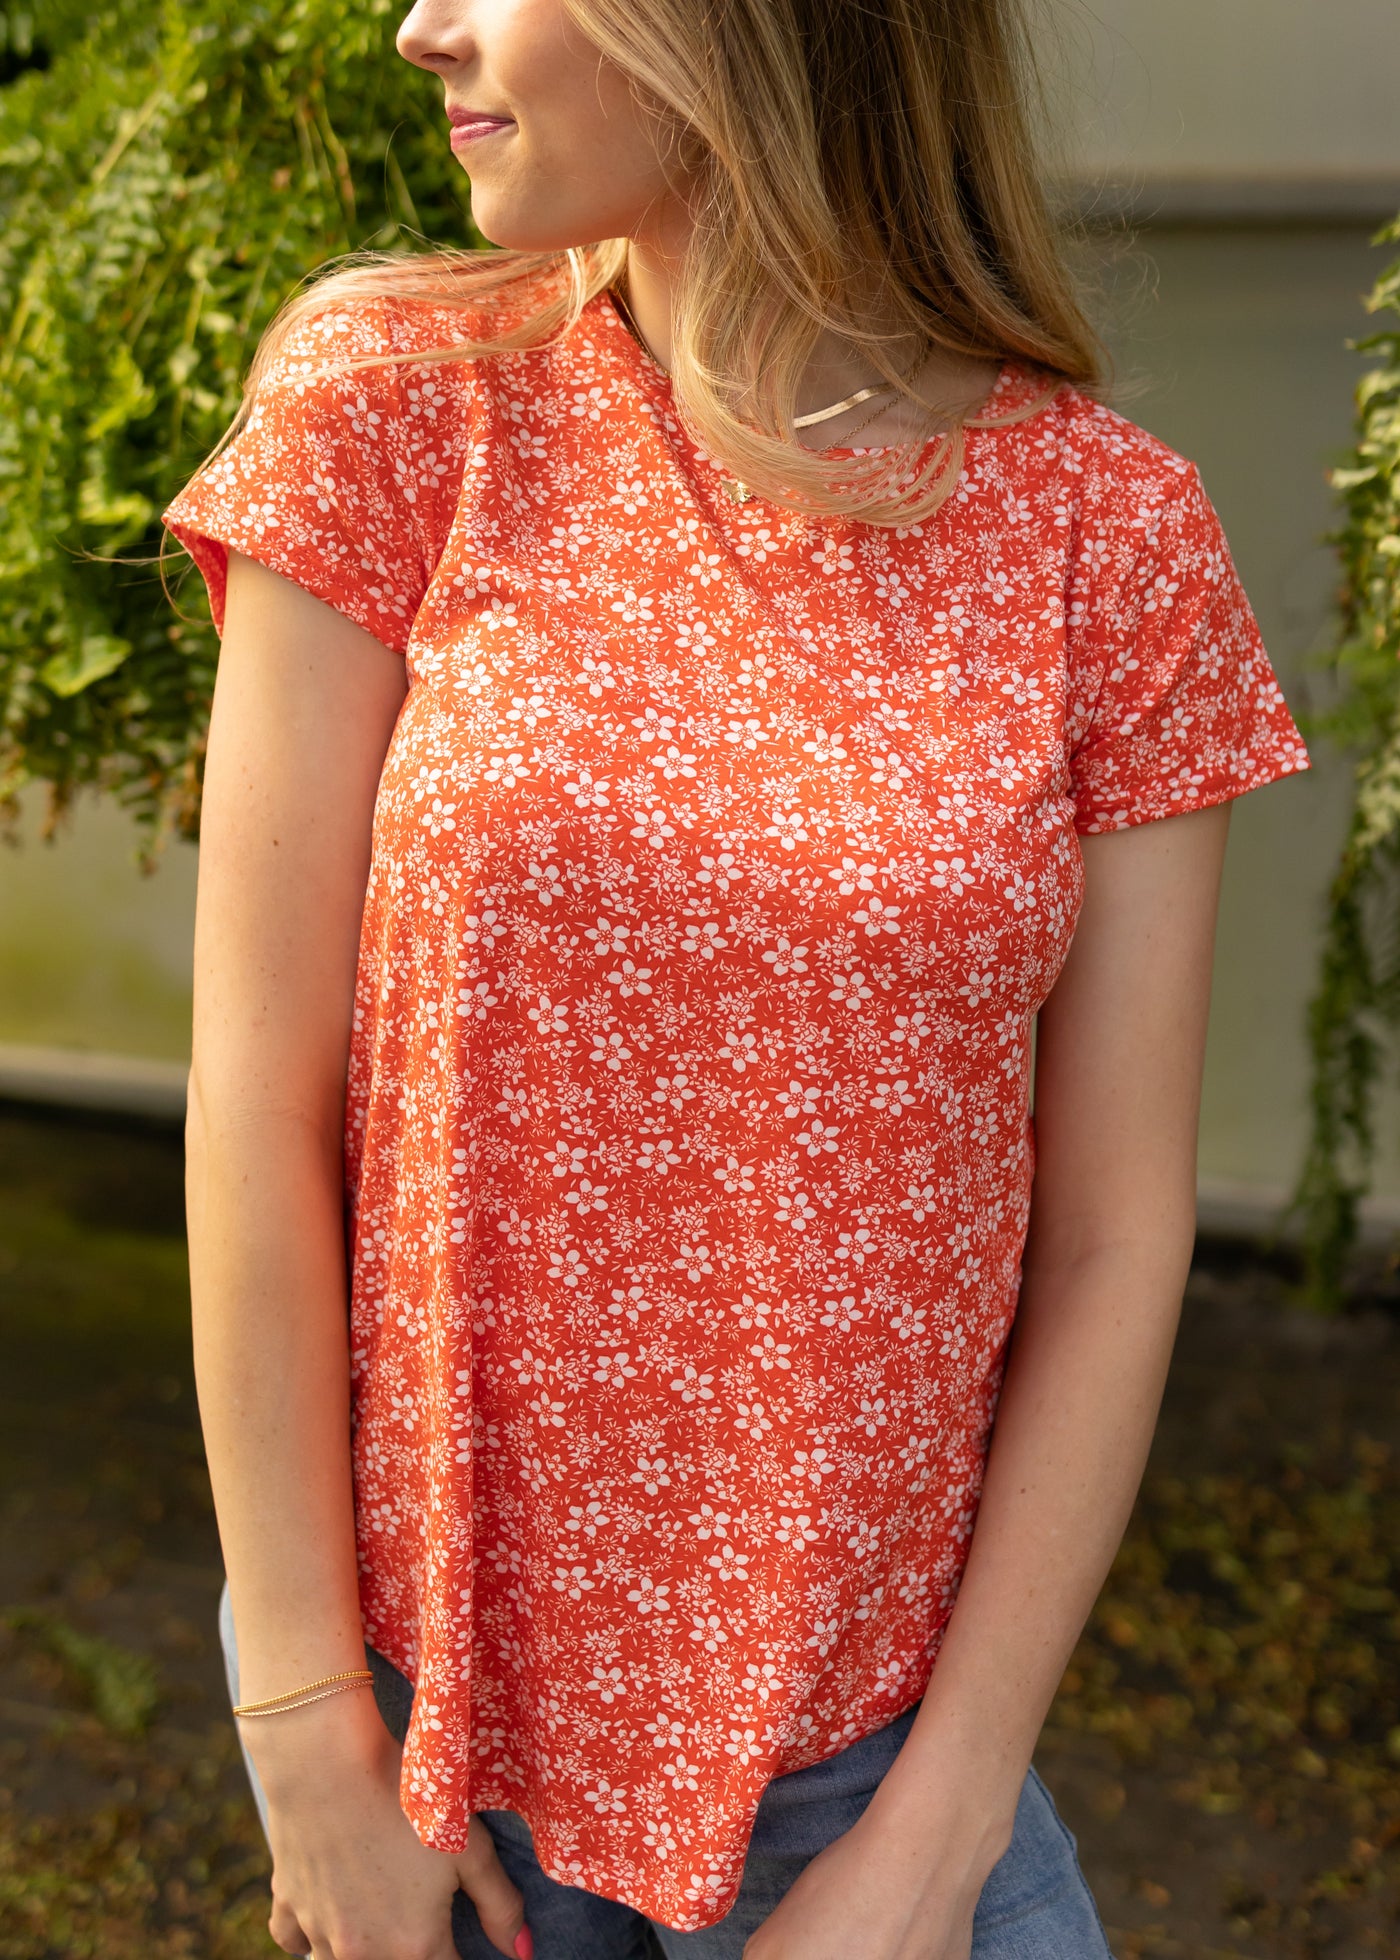 Short sleeve coral red top with small white flowers